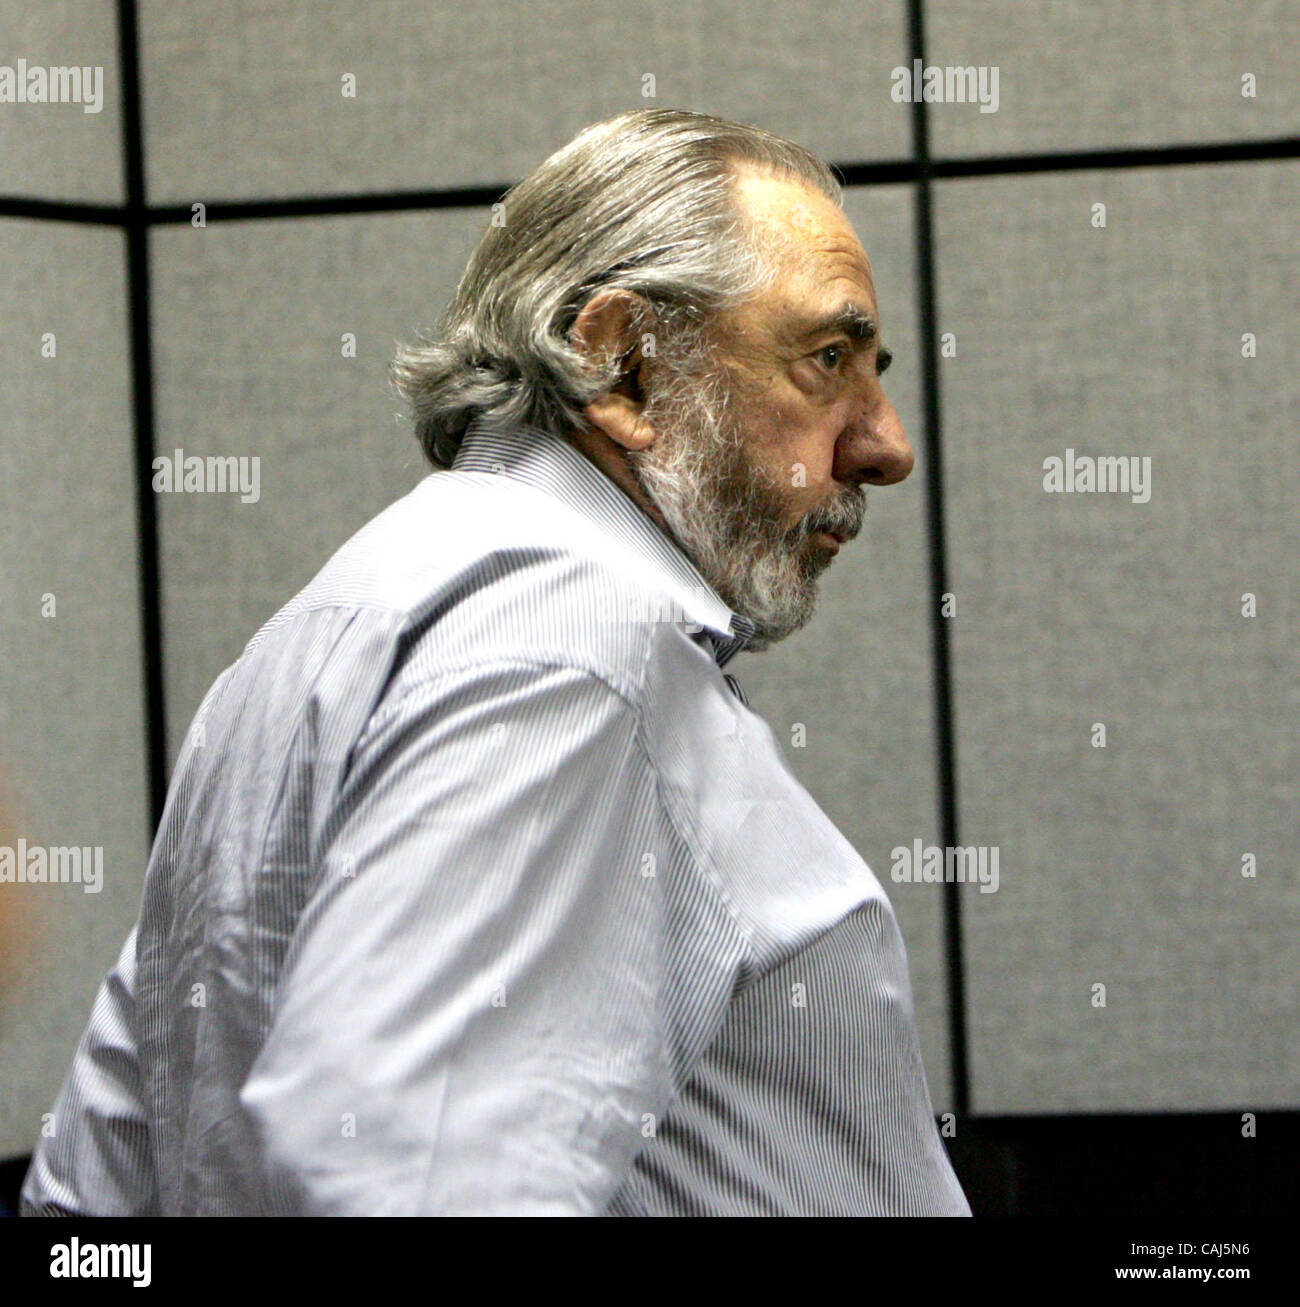 010807 met generator Staff photo by Richard Graulich - 0047380A - WEST PALM  BEACH - Michael Scheffler is booked after being sentenced to nine months in  jail during a hearing at the